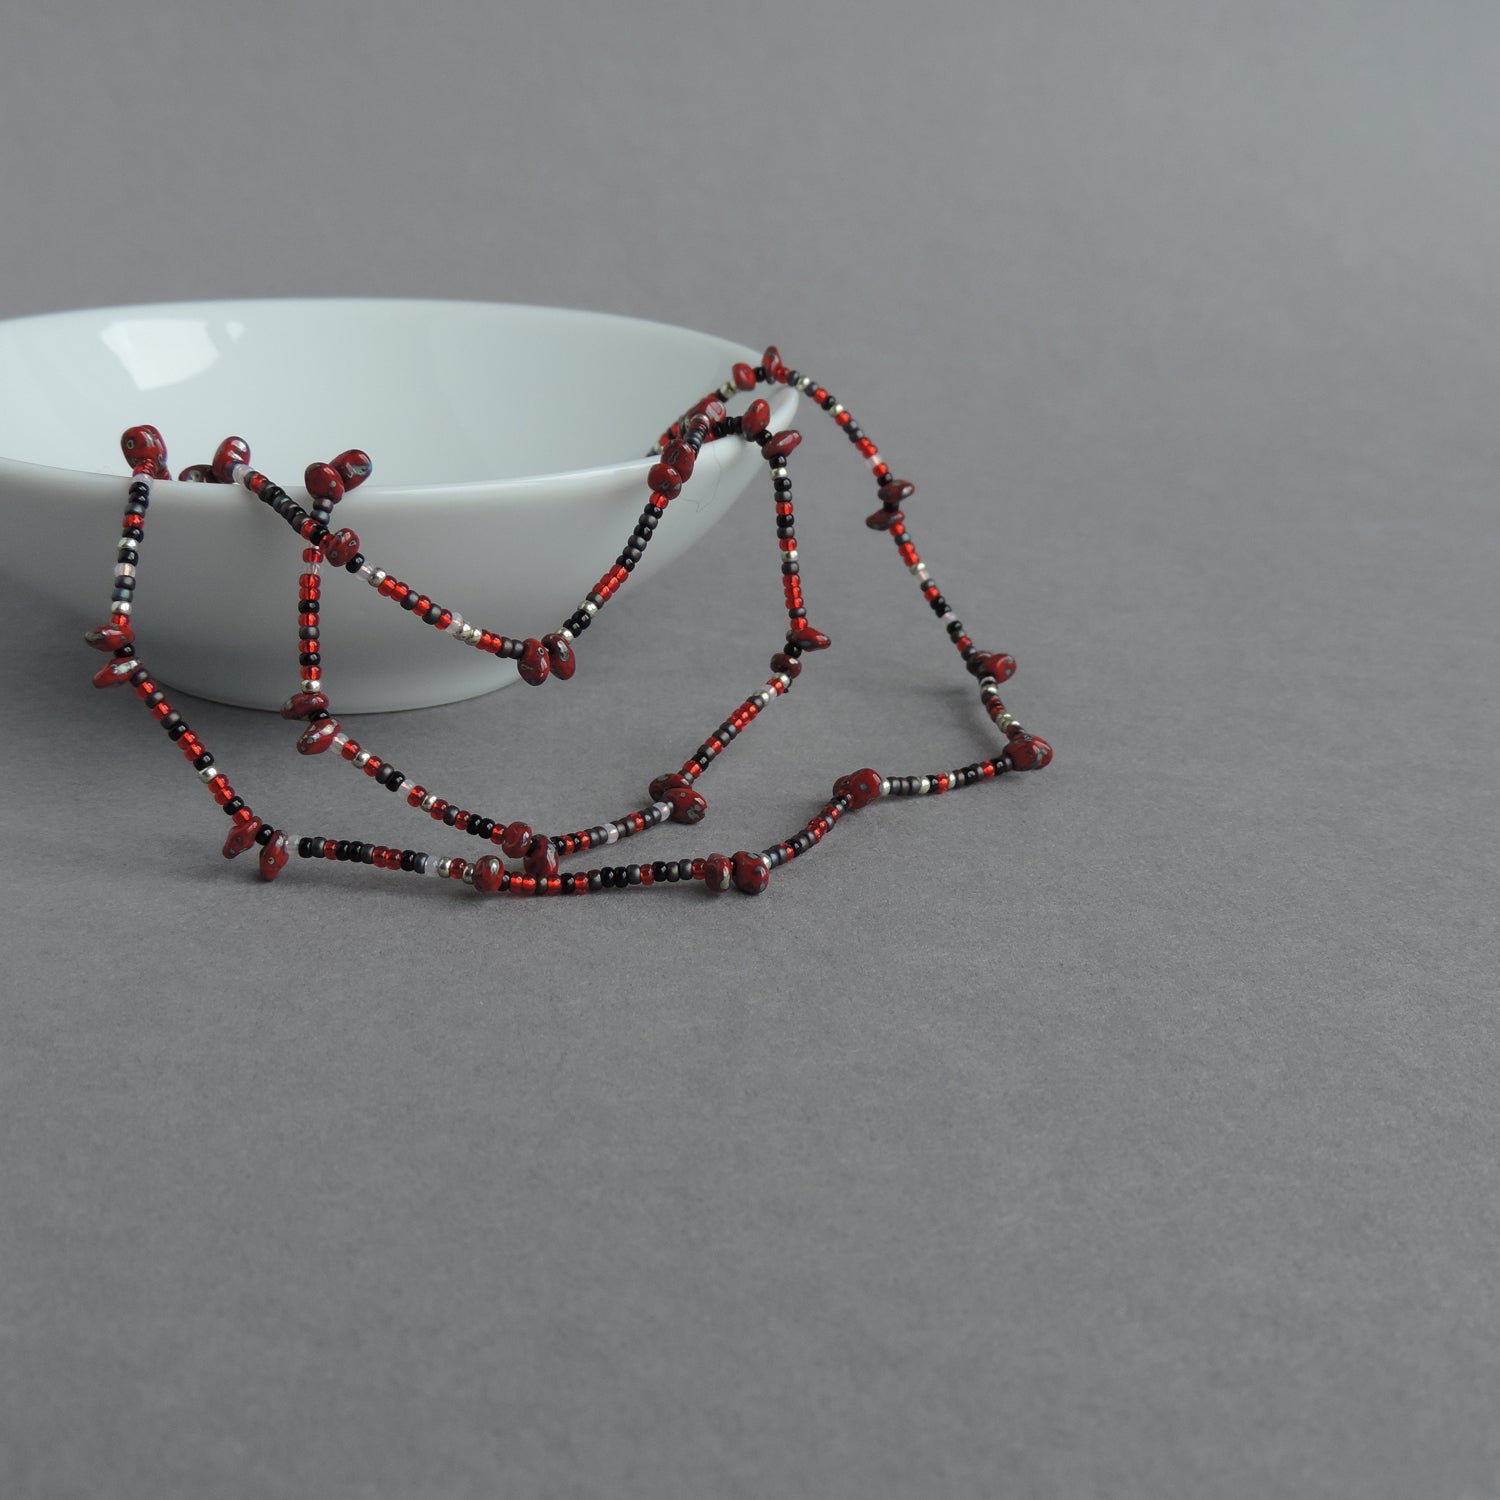 Long red beaded necklace